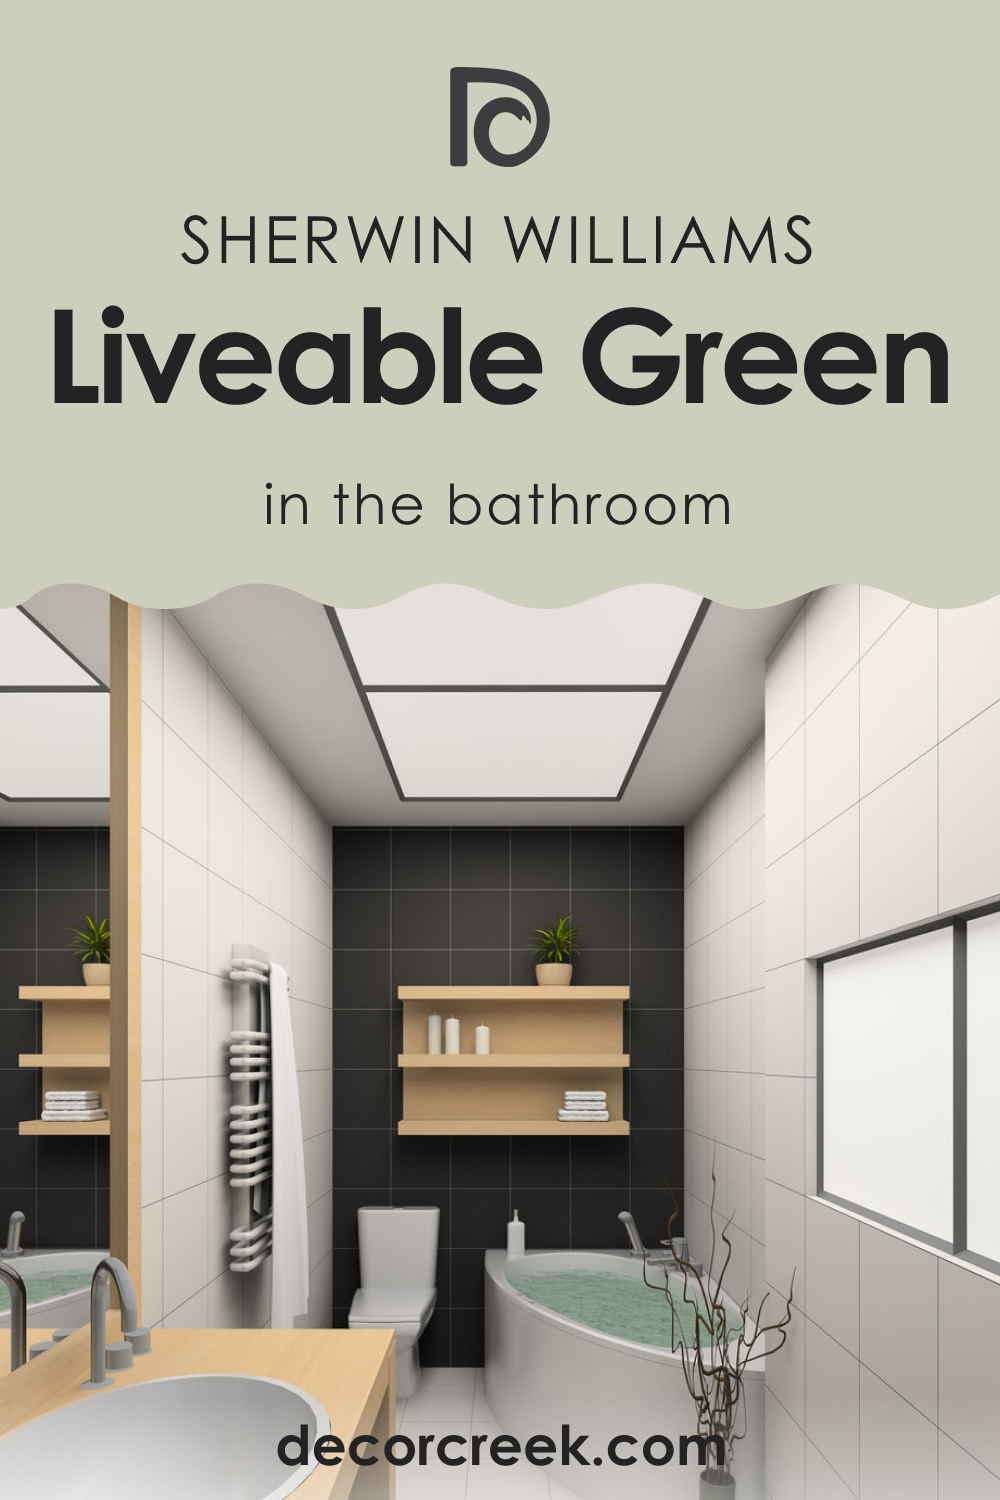 Liveable Green SW 6176 for the Bathroom